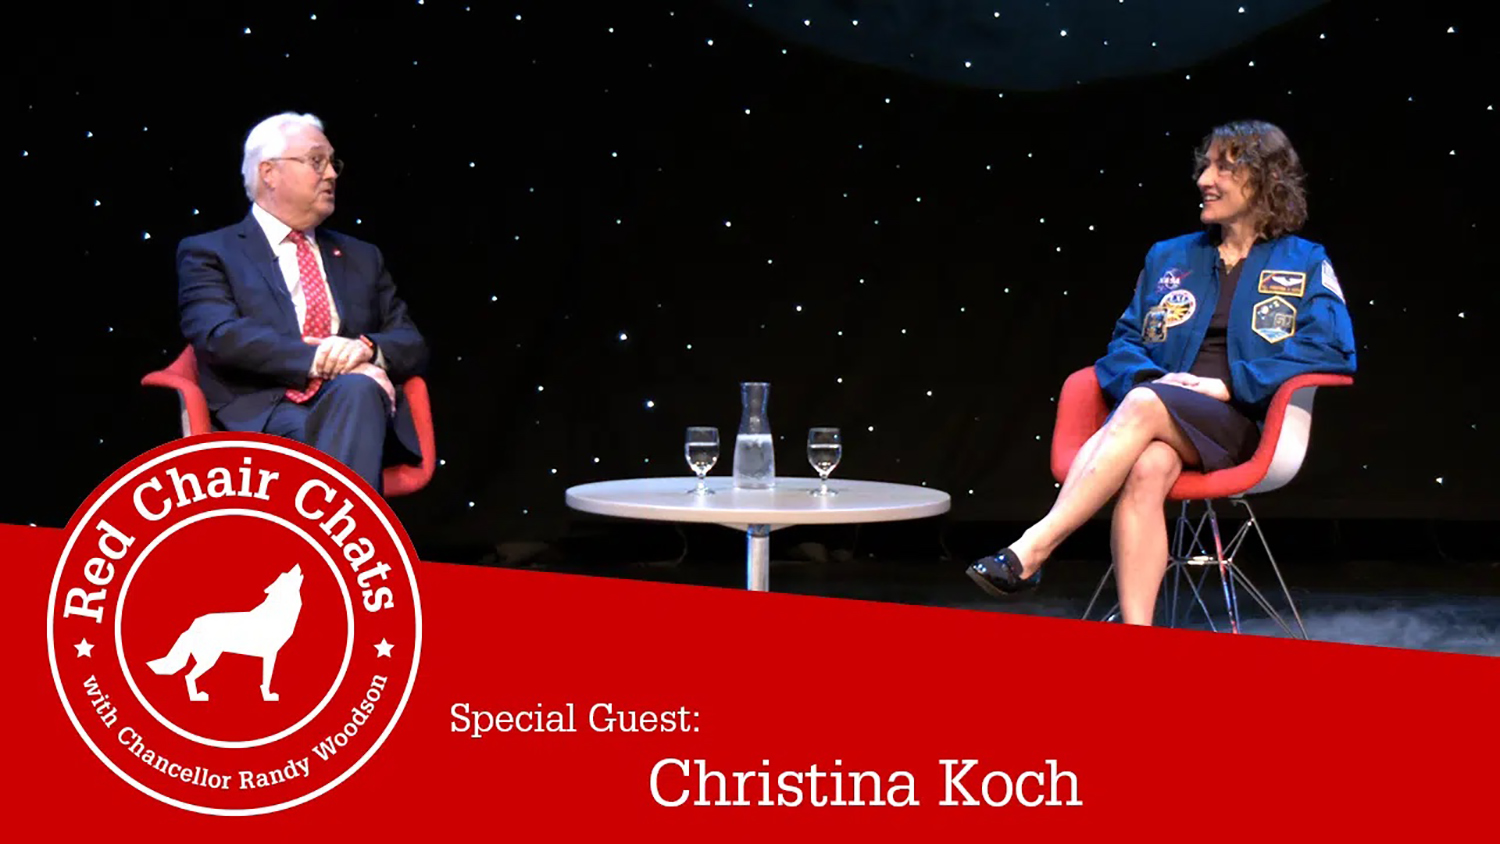 Alumna Christina Koch, right, speaks with Chancellor Randy Woodson during a recent Red Chair Chats podcast. A red banner runs across the bottom of the image with the NC State wolf silhouette on the left.